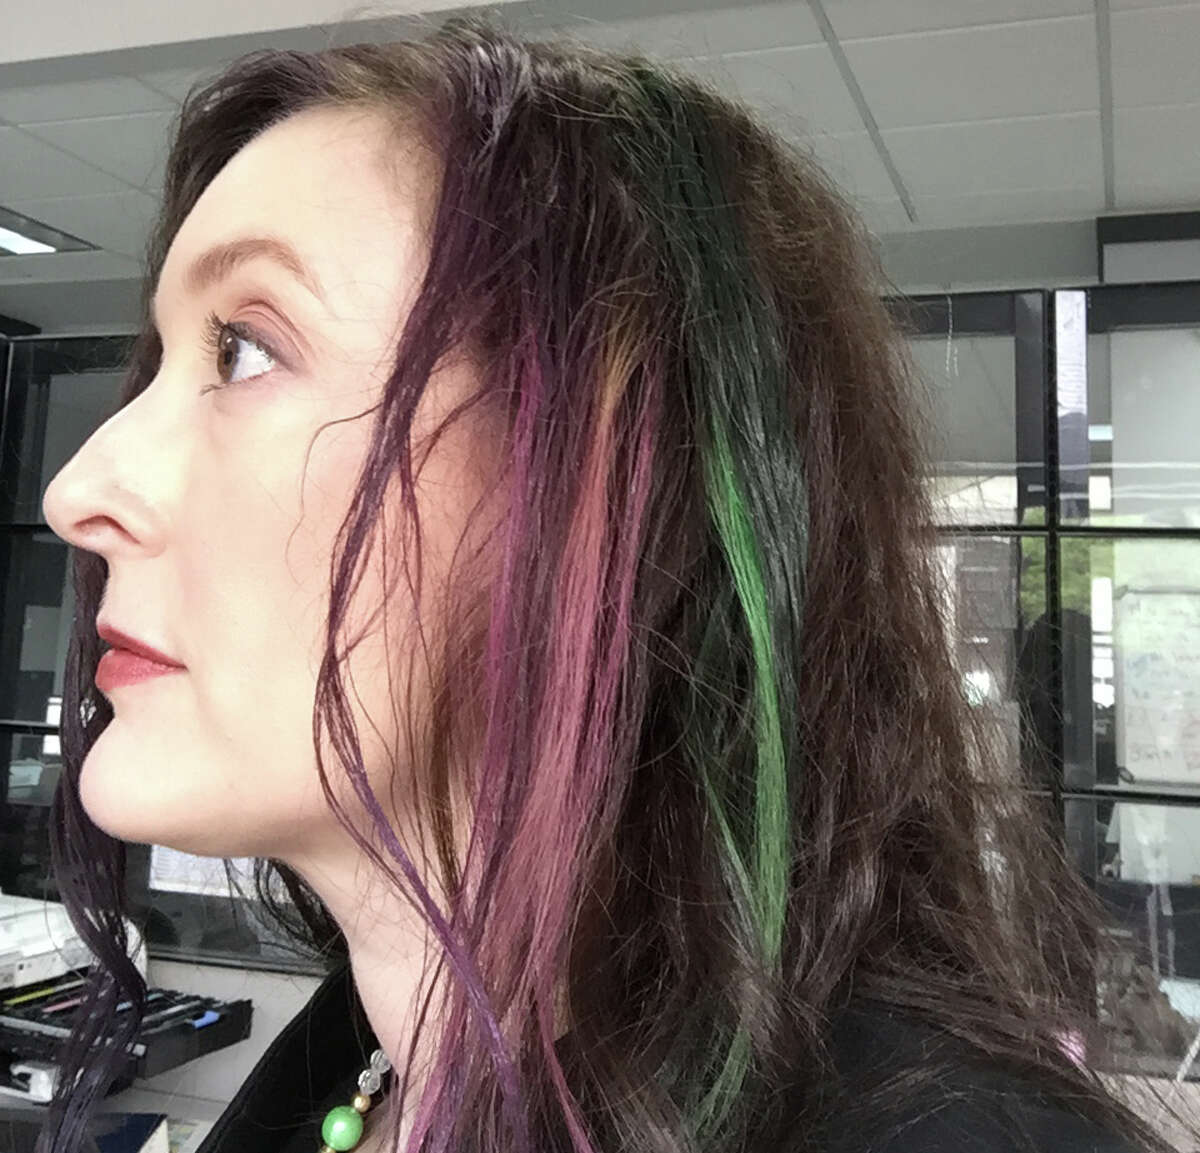 I tried hair chalk and lived to tell the tale